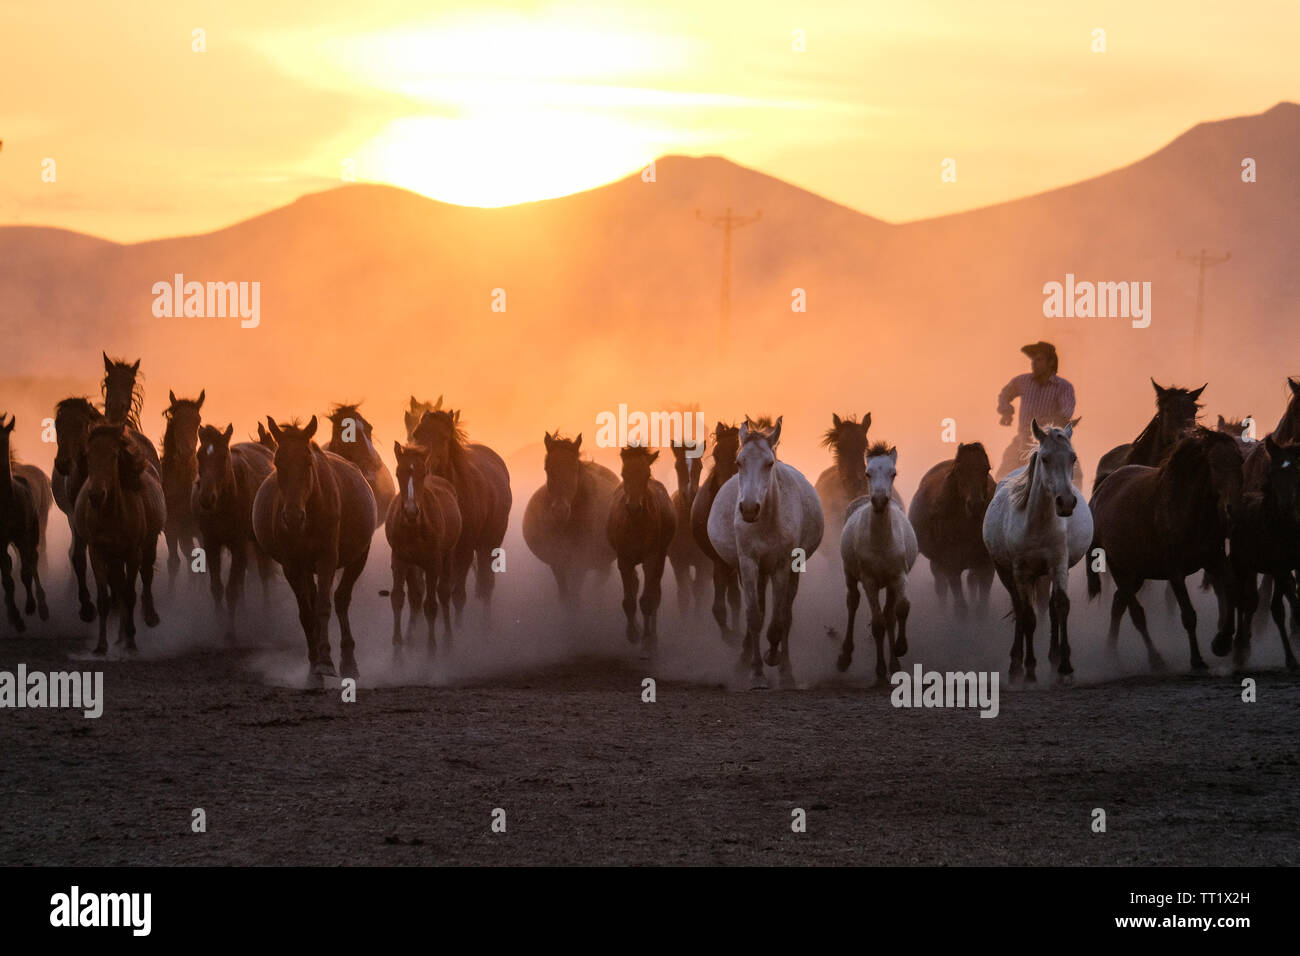 Wild horses and cowboy running in dusty field Stock Photo